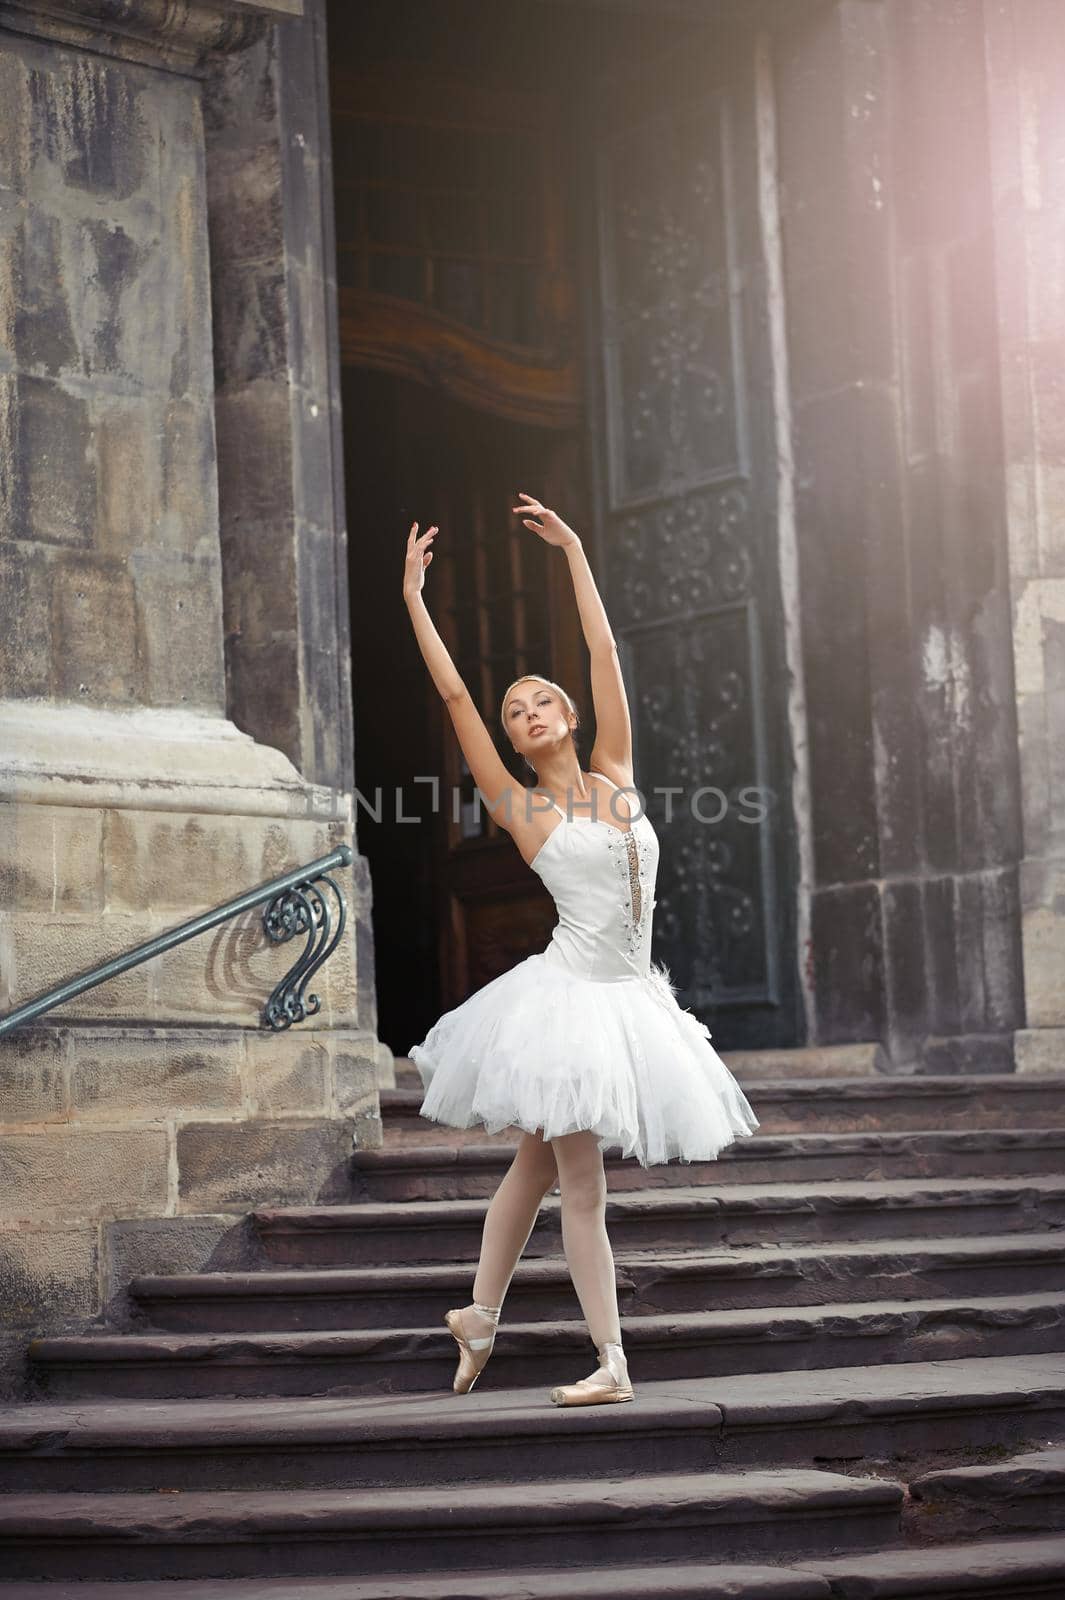 Gorgeous female ballet dancer performing outdoors dancing near and old building.